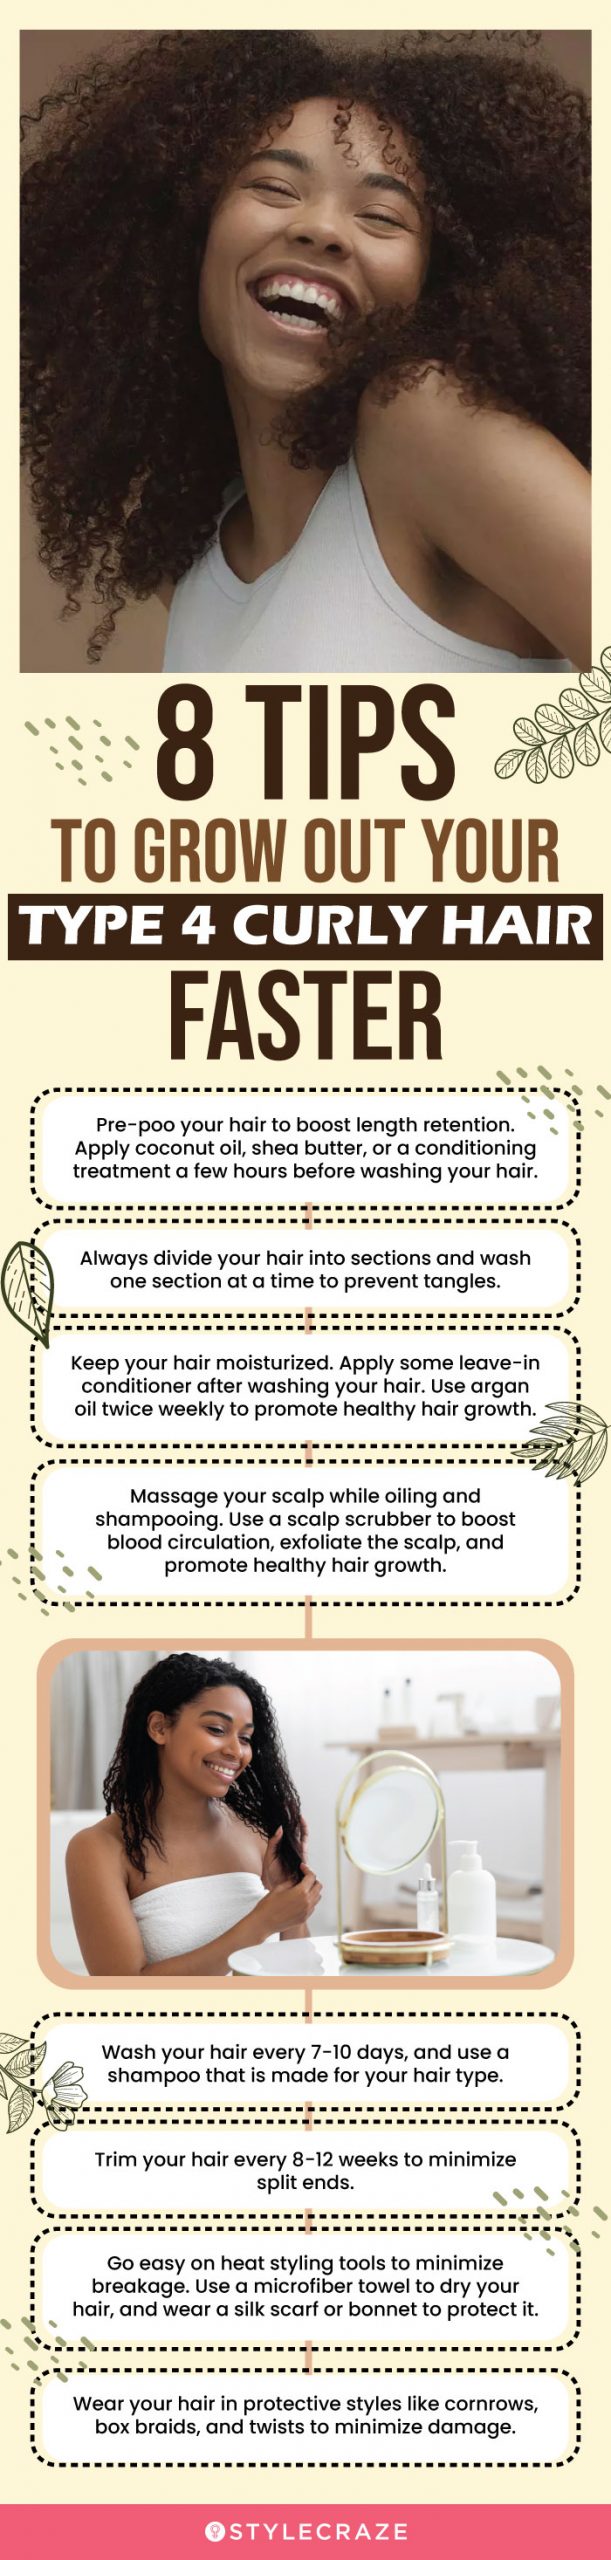 8 tips to grow out your kinky curly hair faster (infographic)